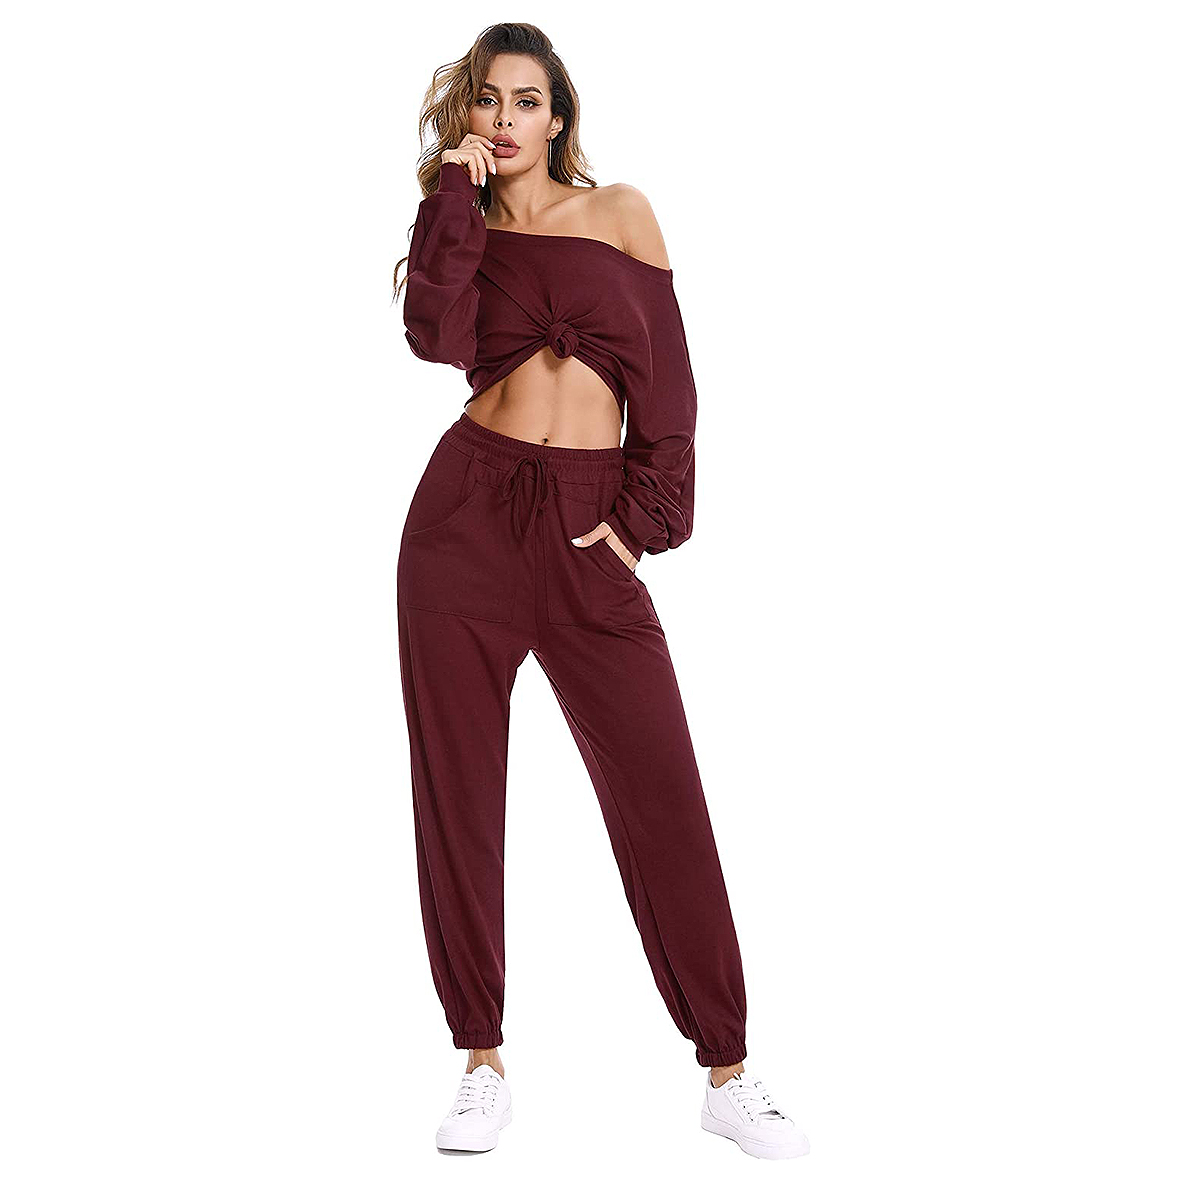 Sykooria Loungewear Set Stands Out From the Rest | Us Weekly